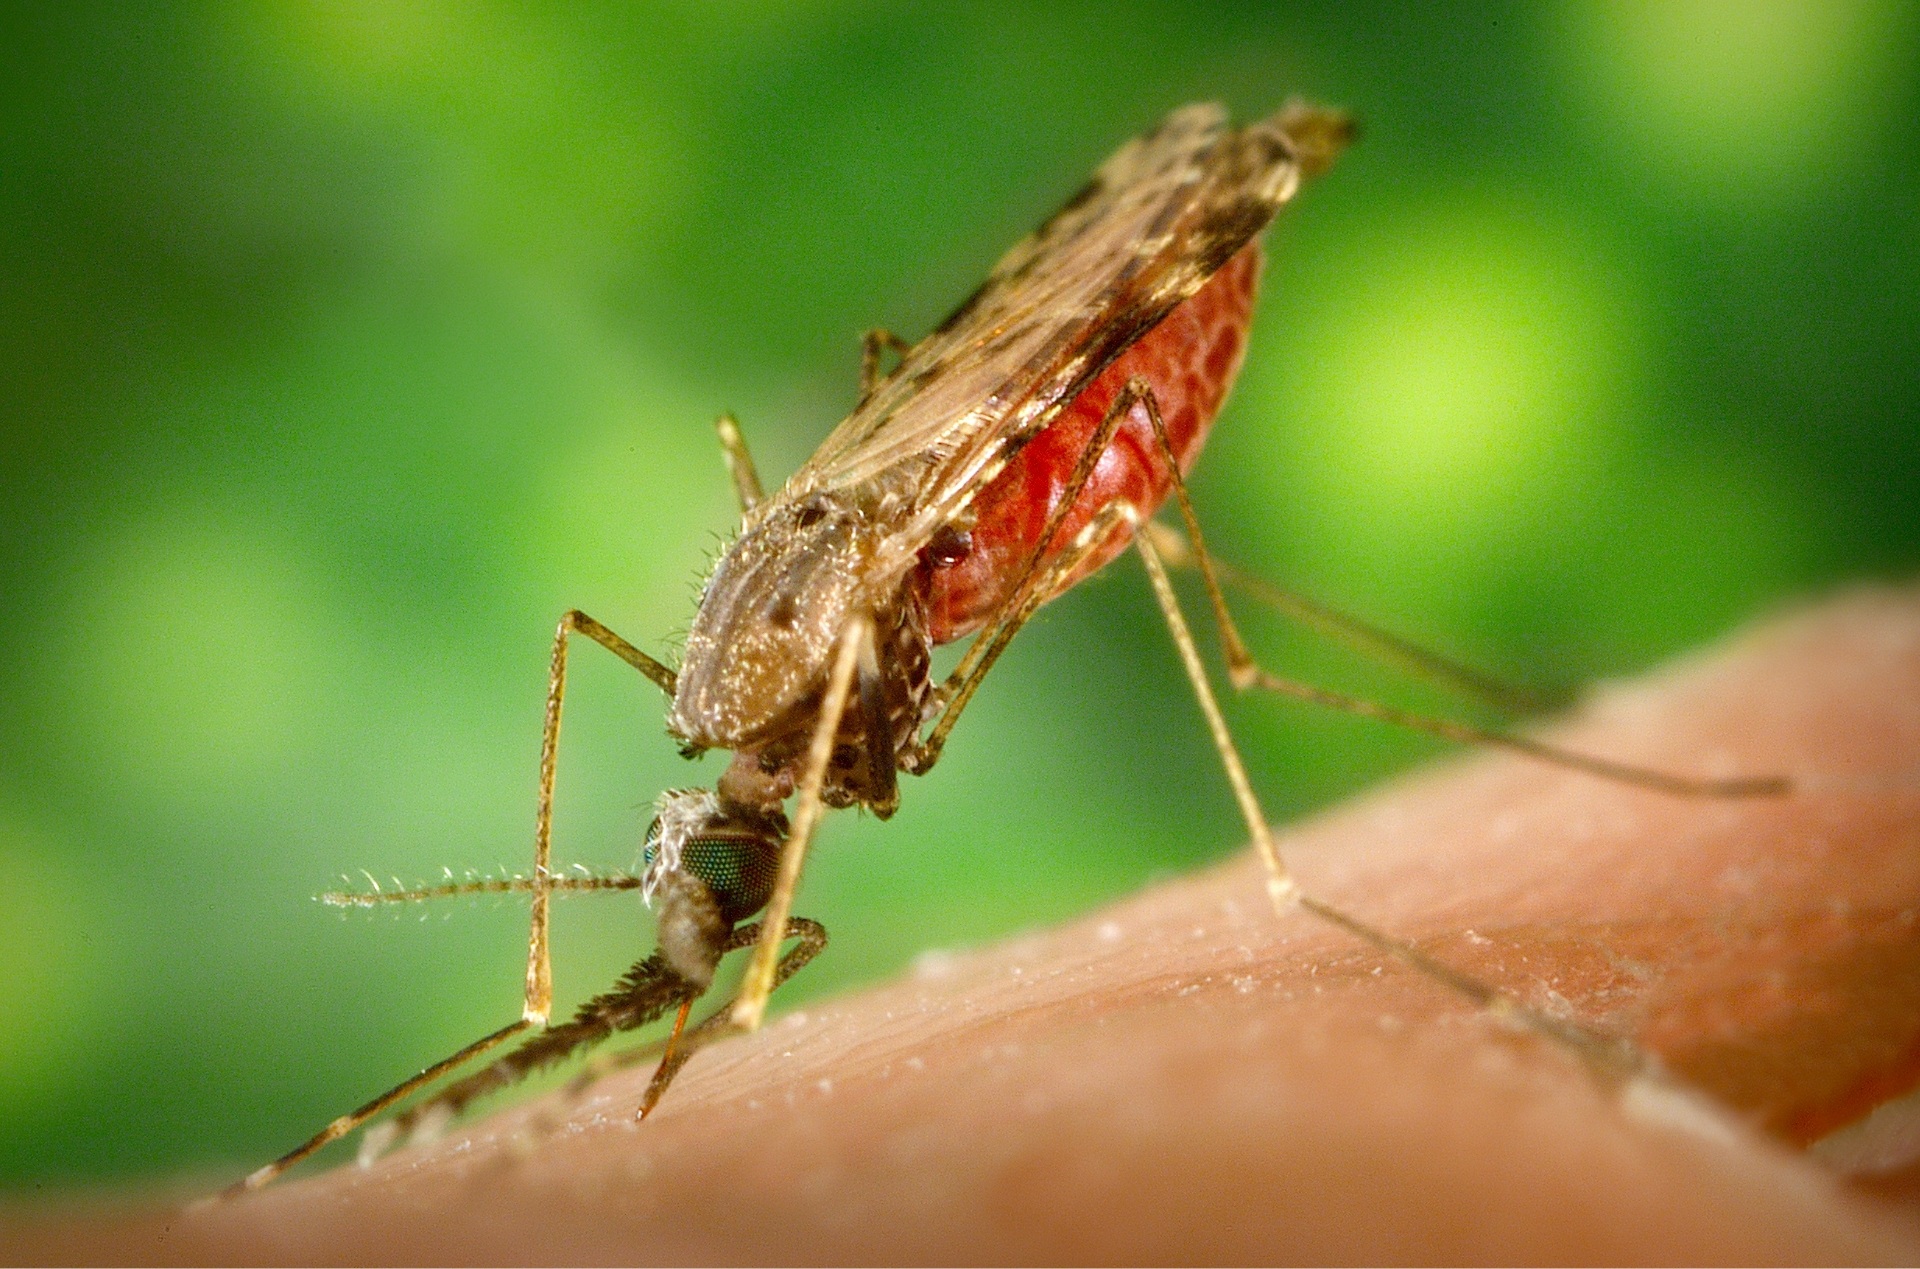 Novartis and MMV move to Phase III study to treat uncomplicated malaria